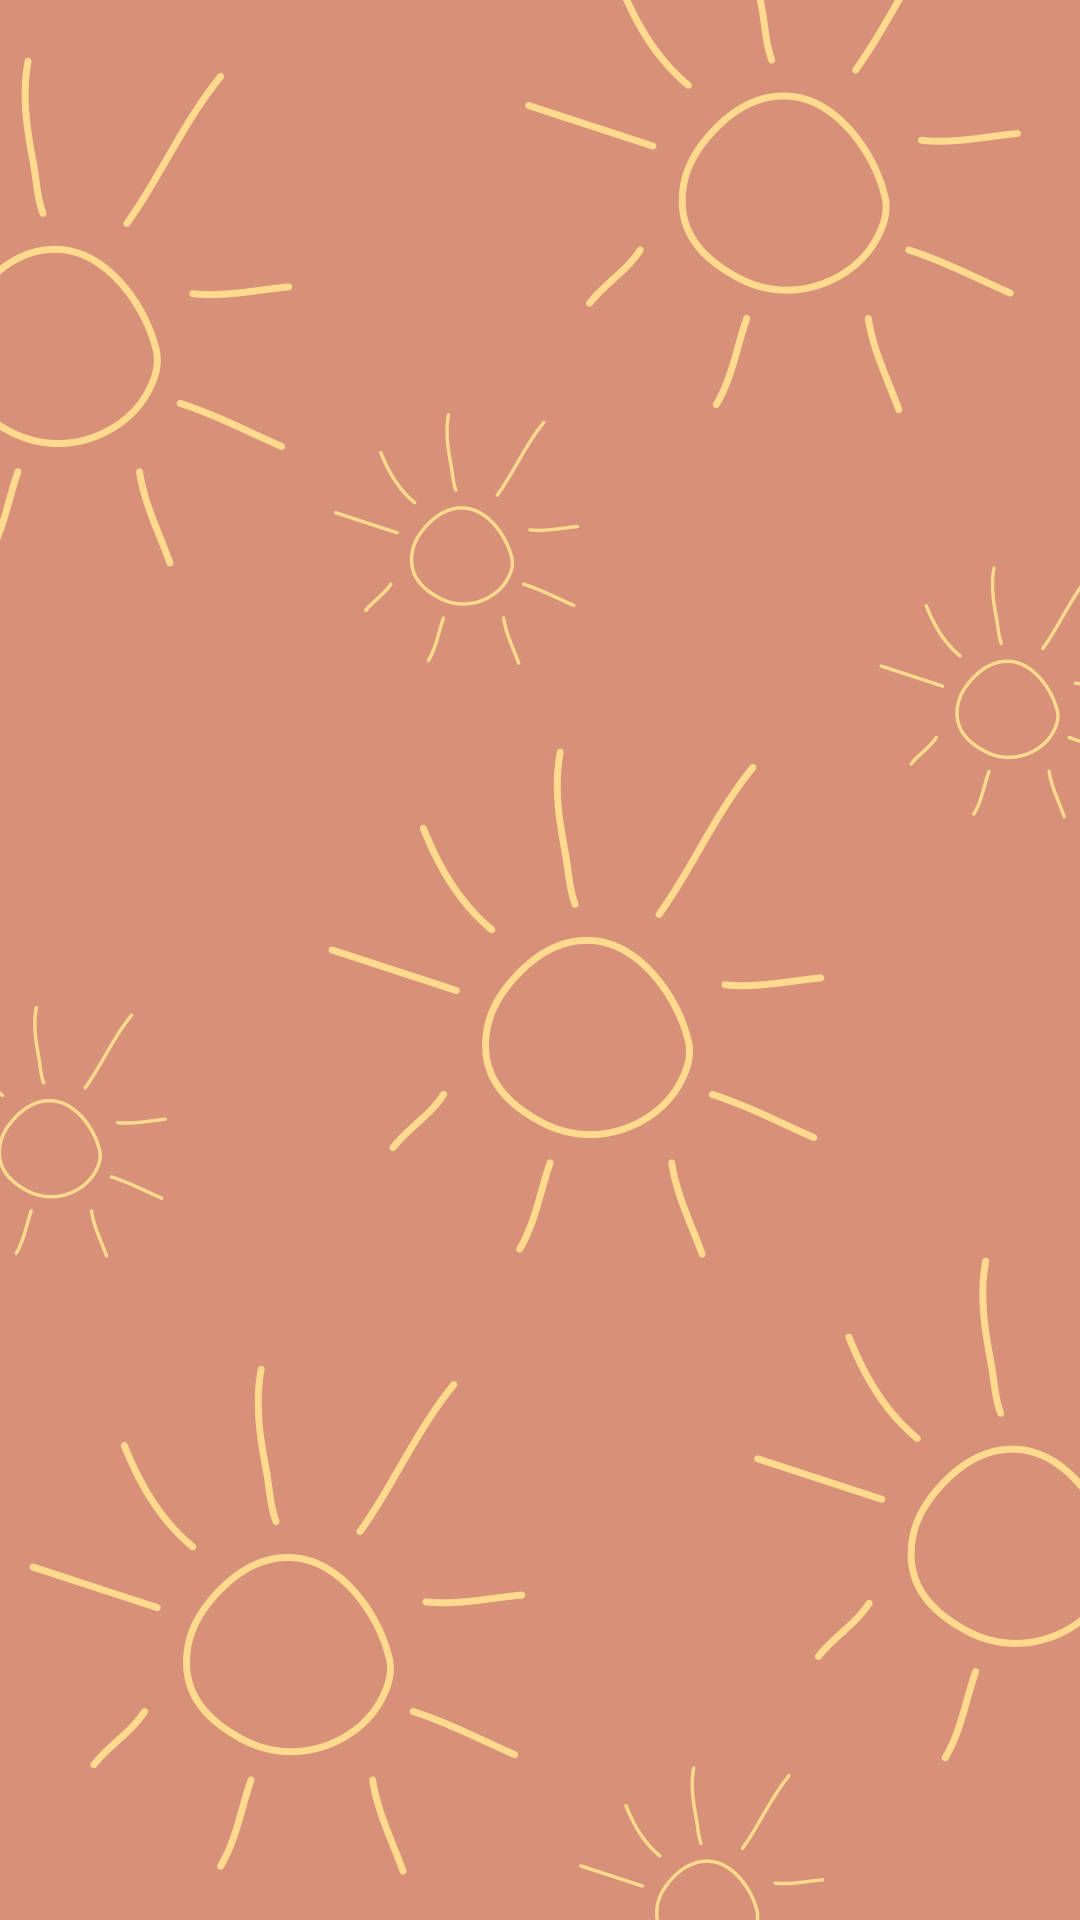 A pattern of suns on an orange background - Coral, boho